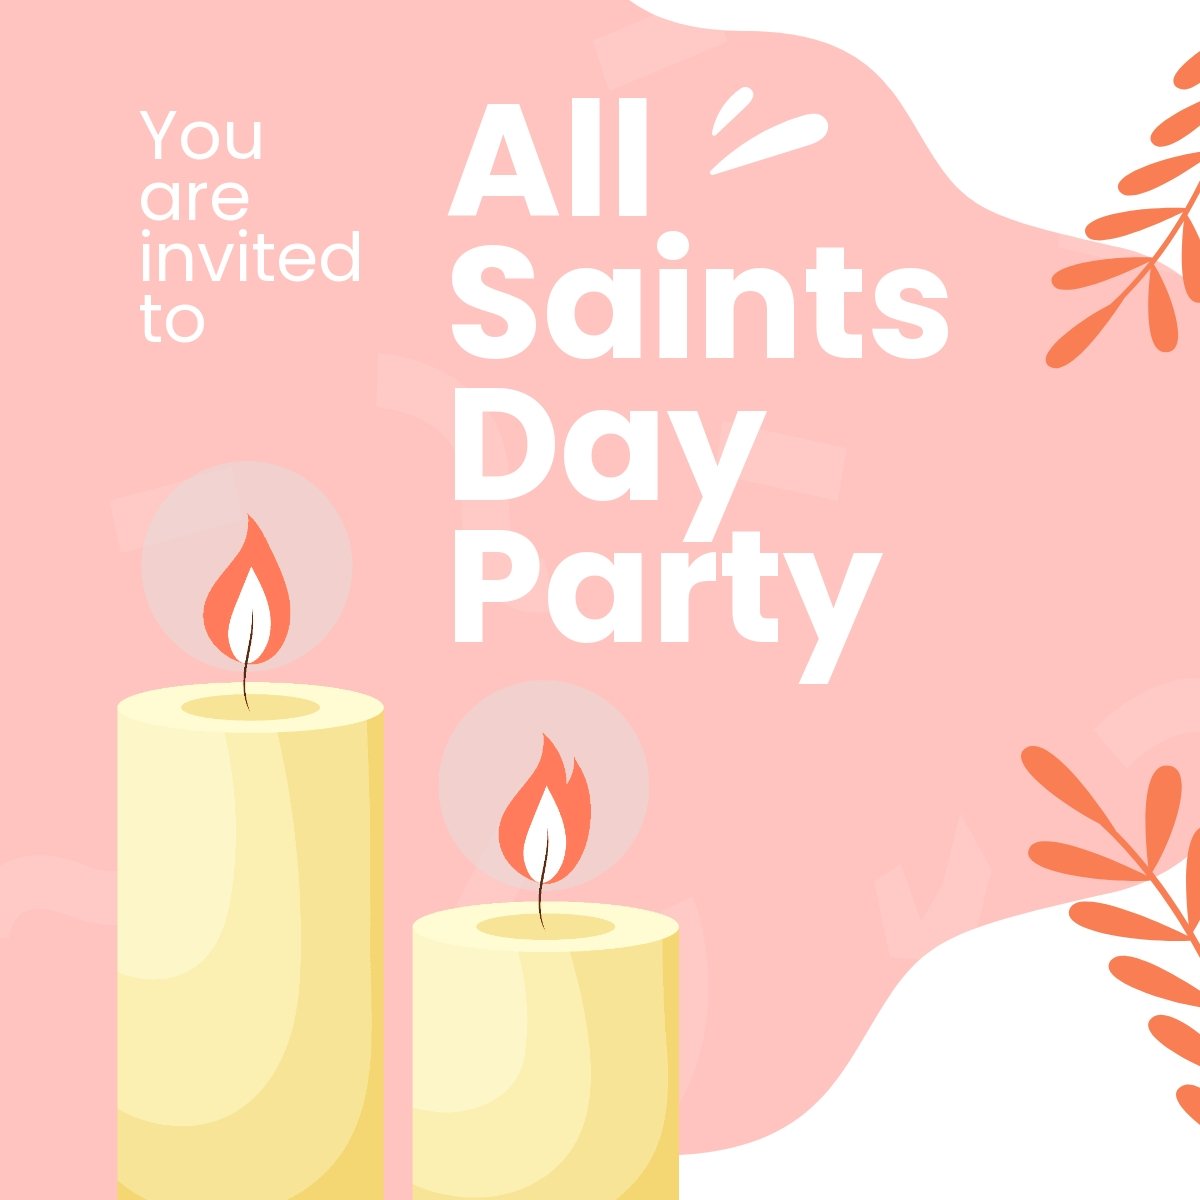 All Saints Day Party Linkedin Post Template